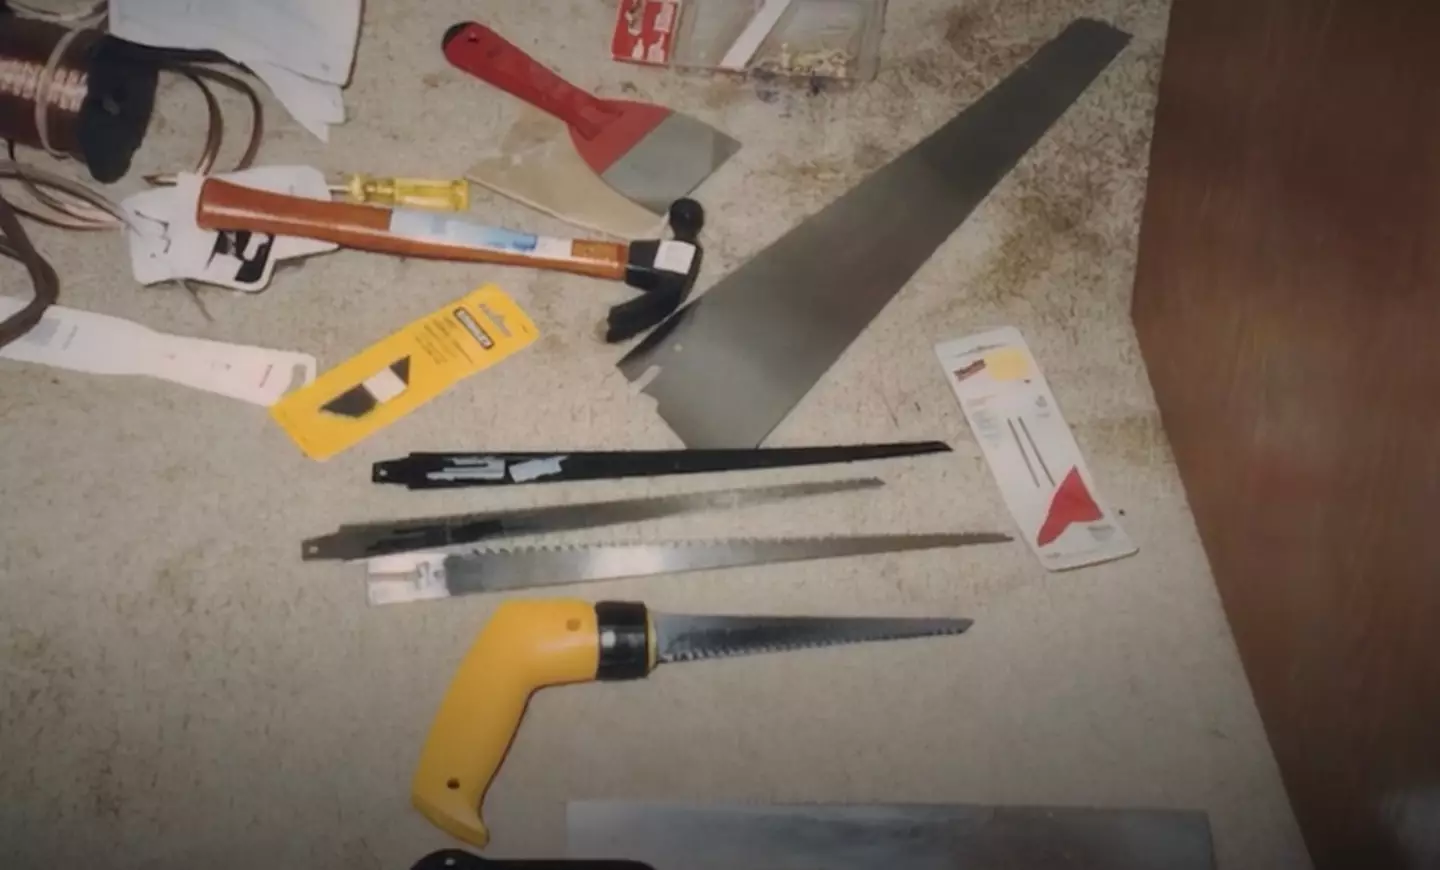 A collection of tools that were used for dismemberment.